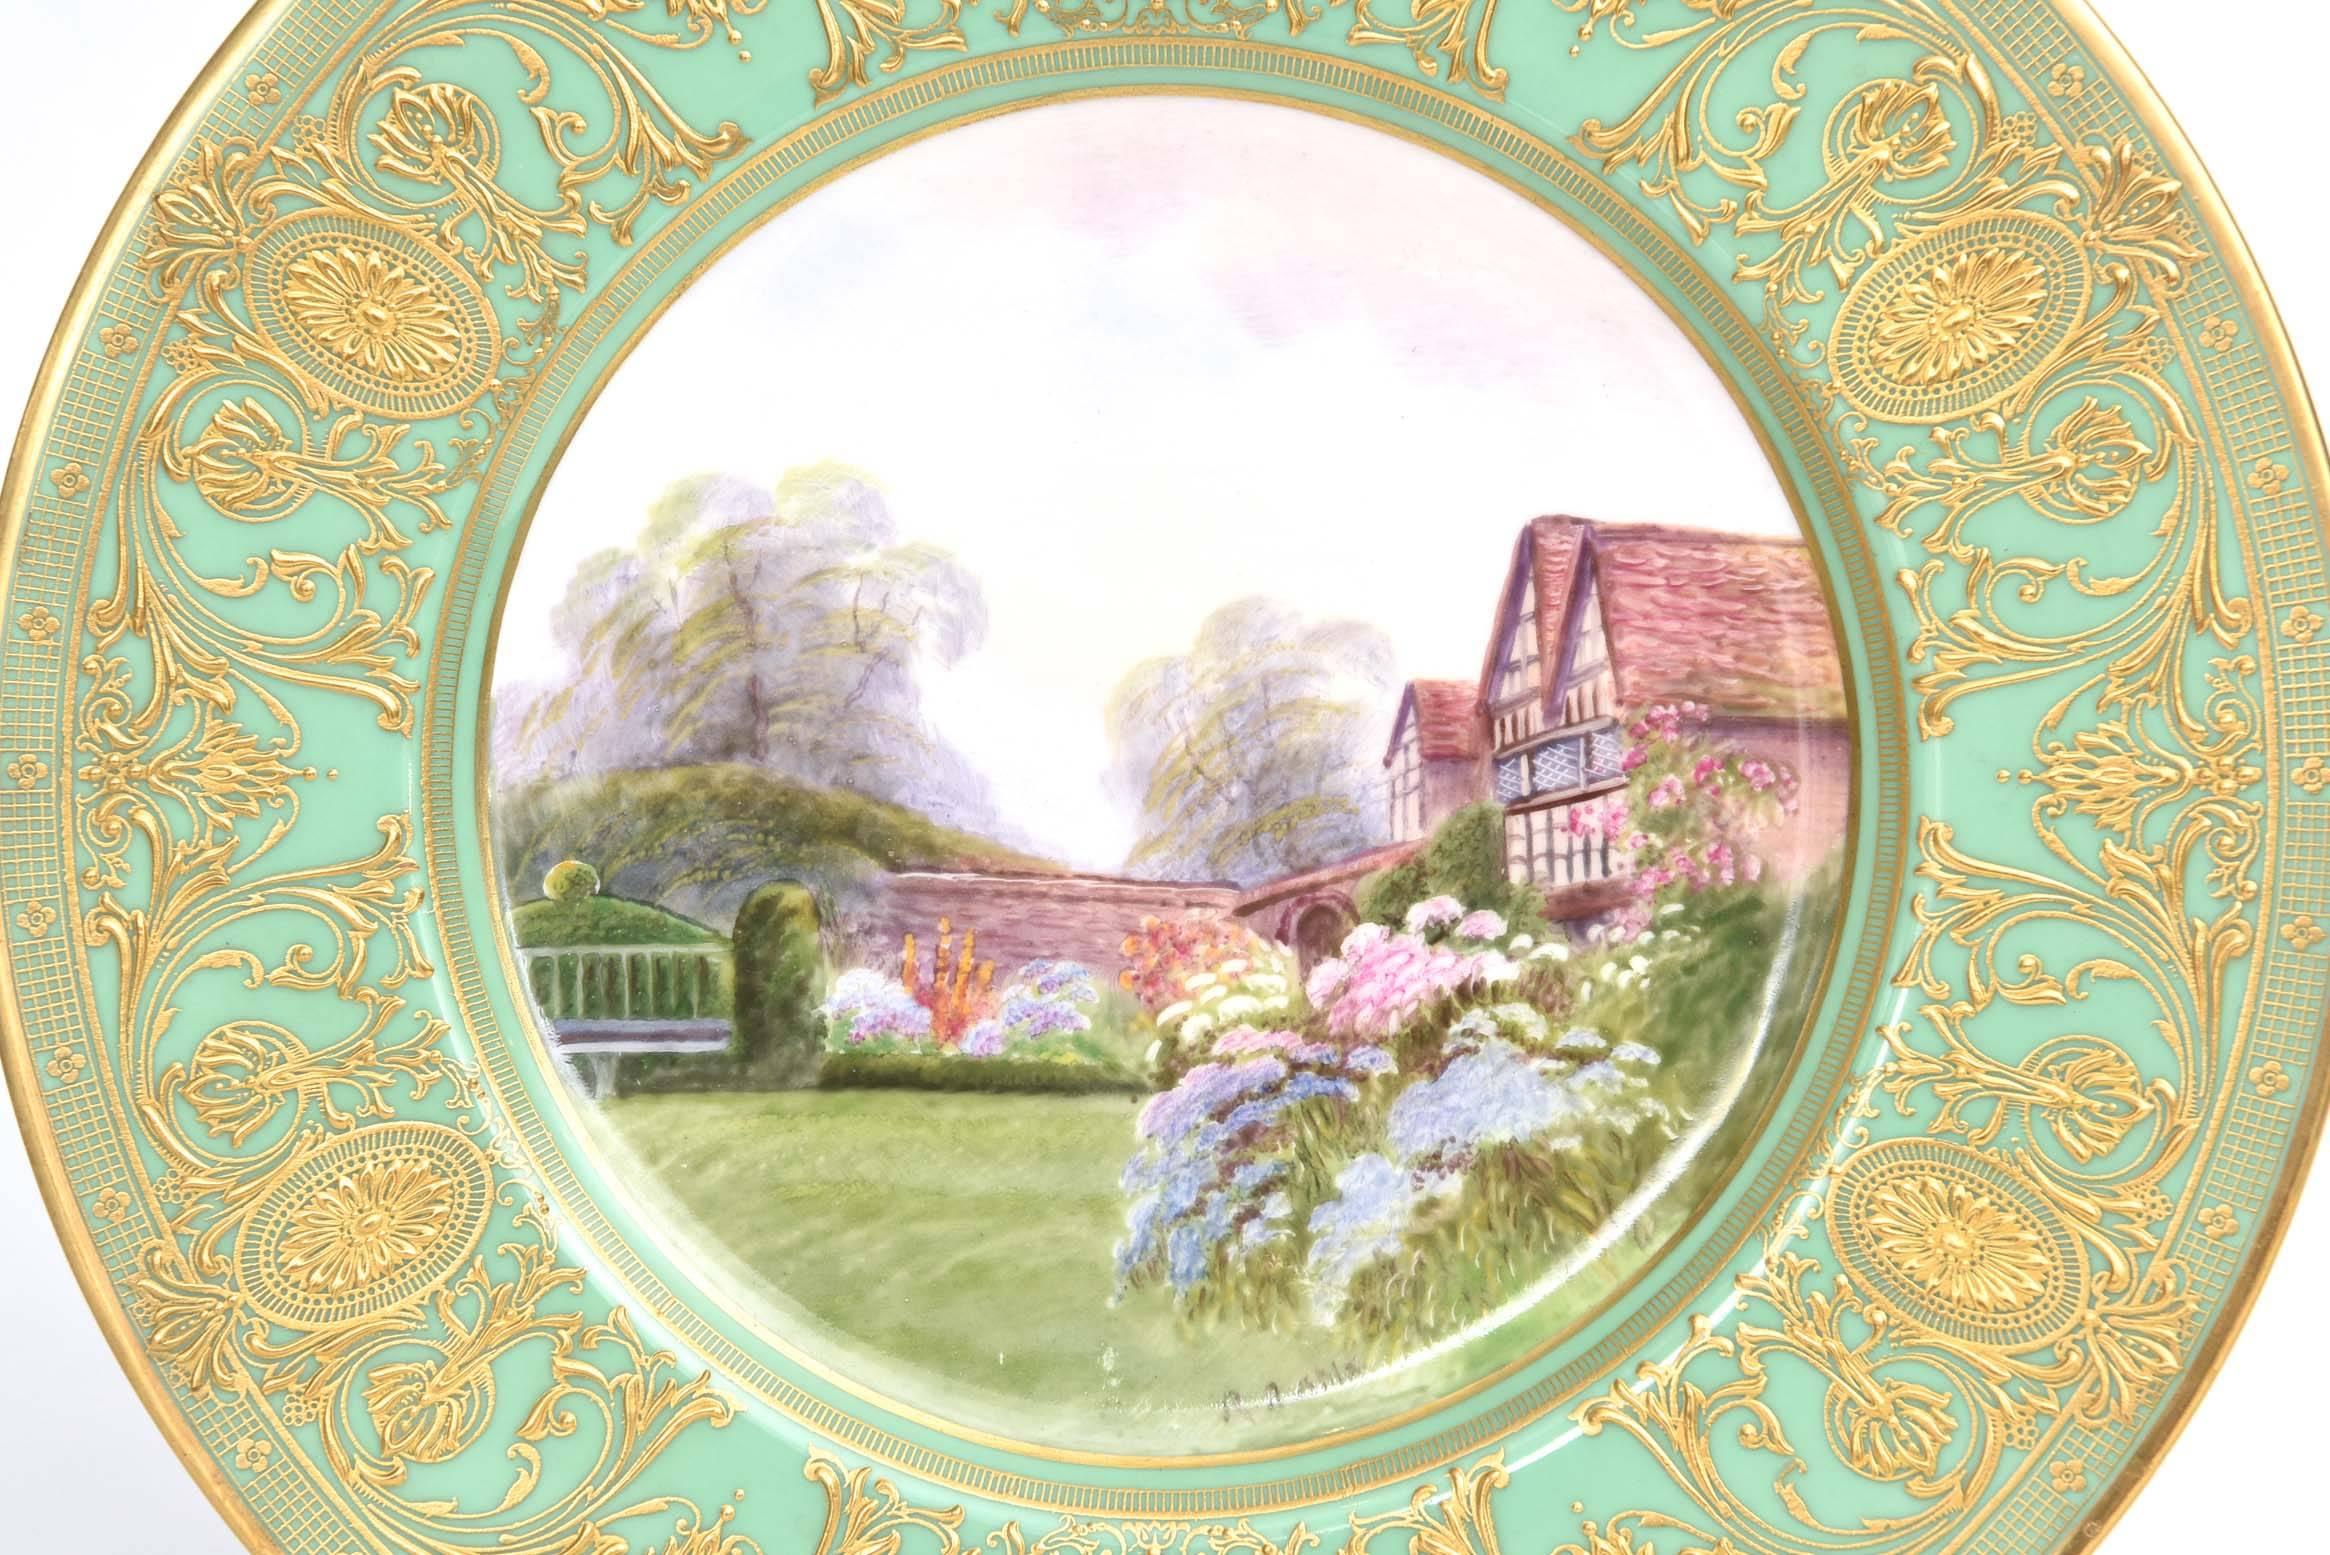 An exquisite scenic work of art on porcelain by one of England's re-known artists: Raymond Rushton. A beautifully detailed lush landscape of Tangley Manor, Surrey. Rich and heavily gilt encrusted on a vibrant green shoulder. Custom ordered through